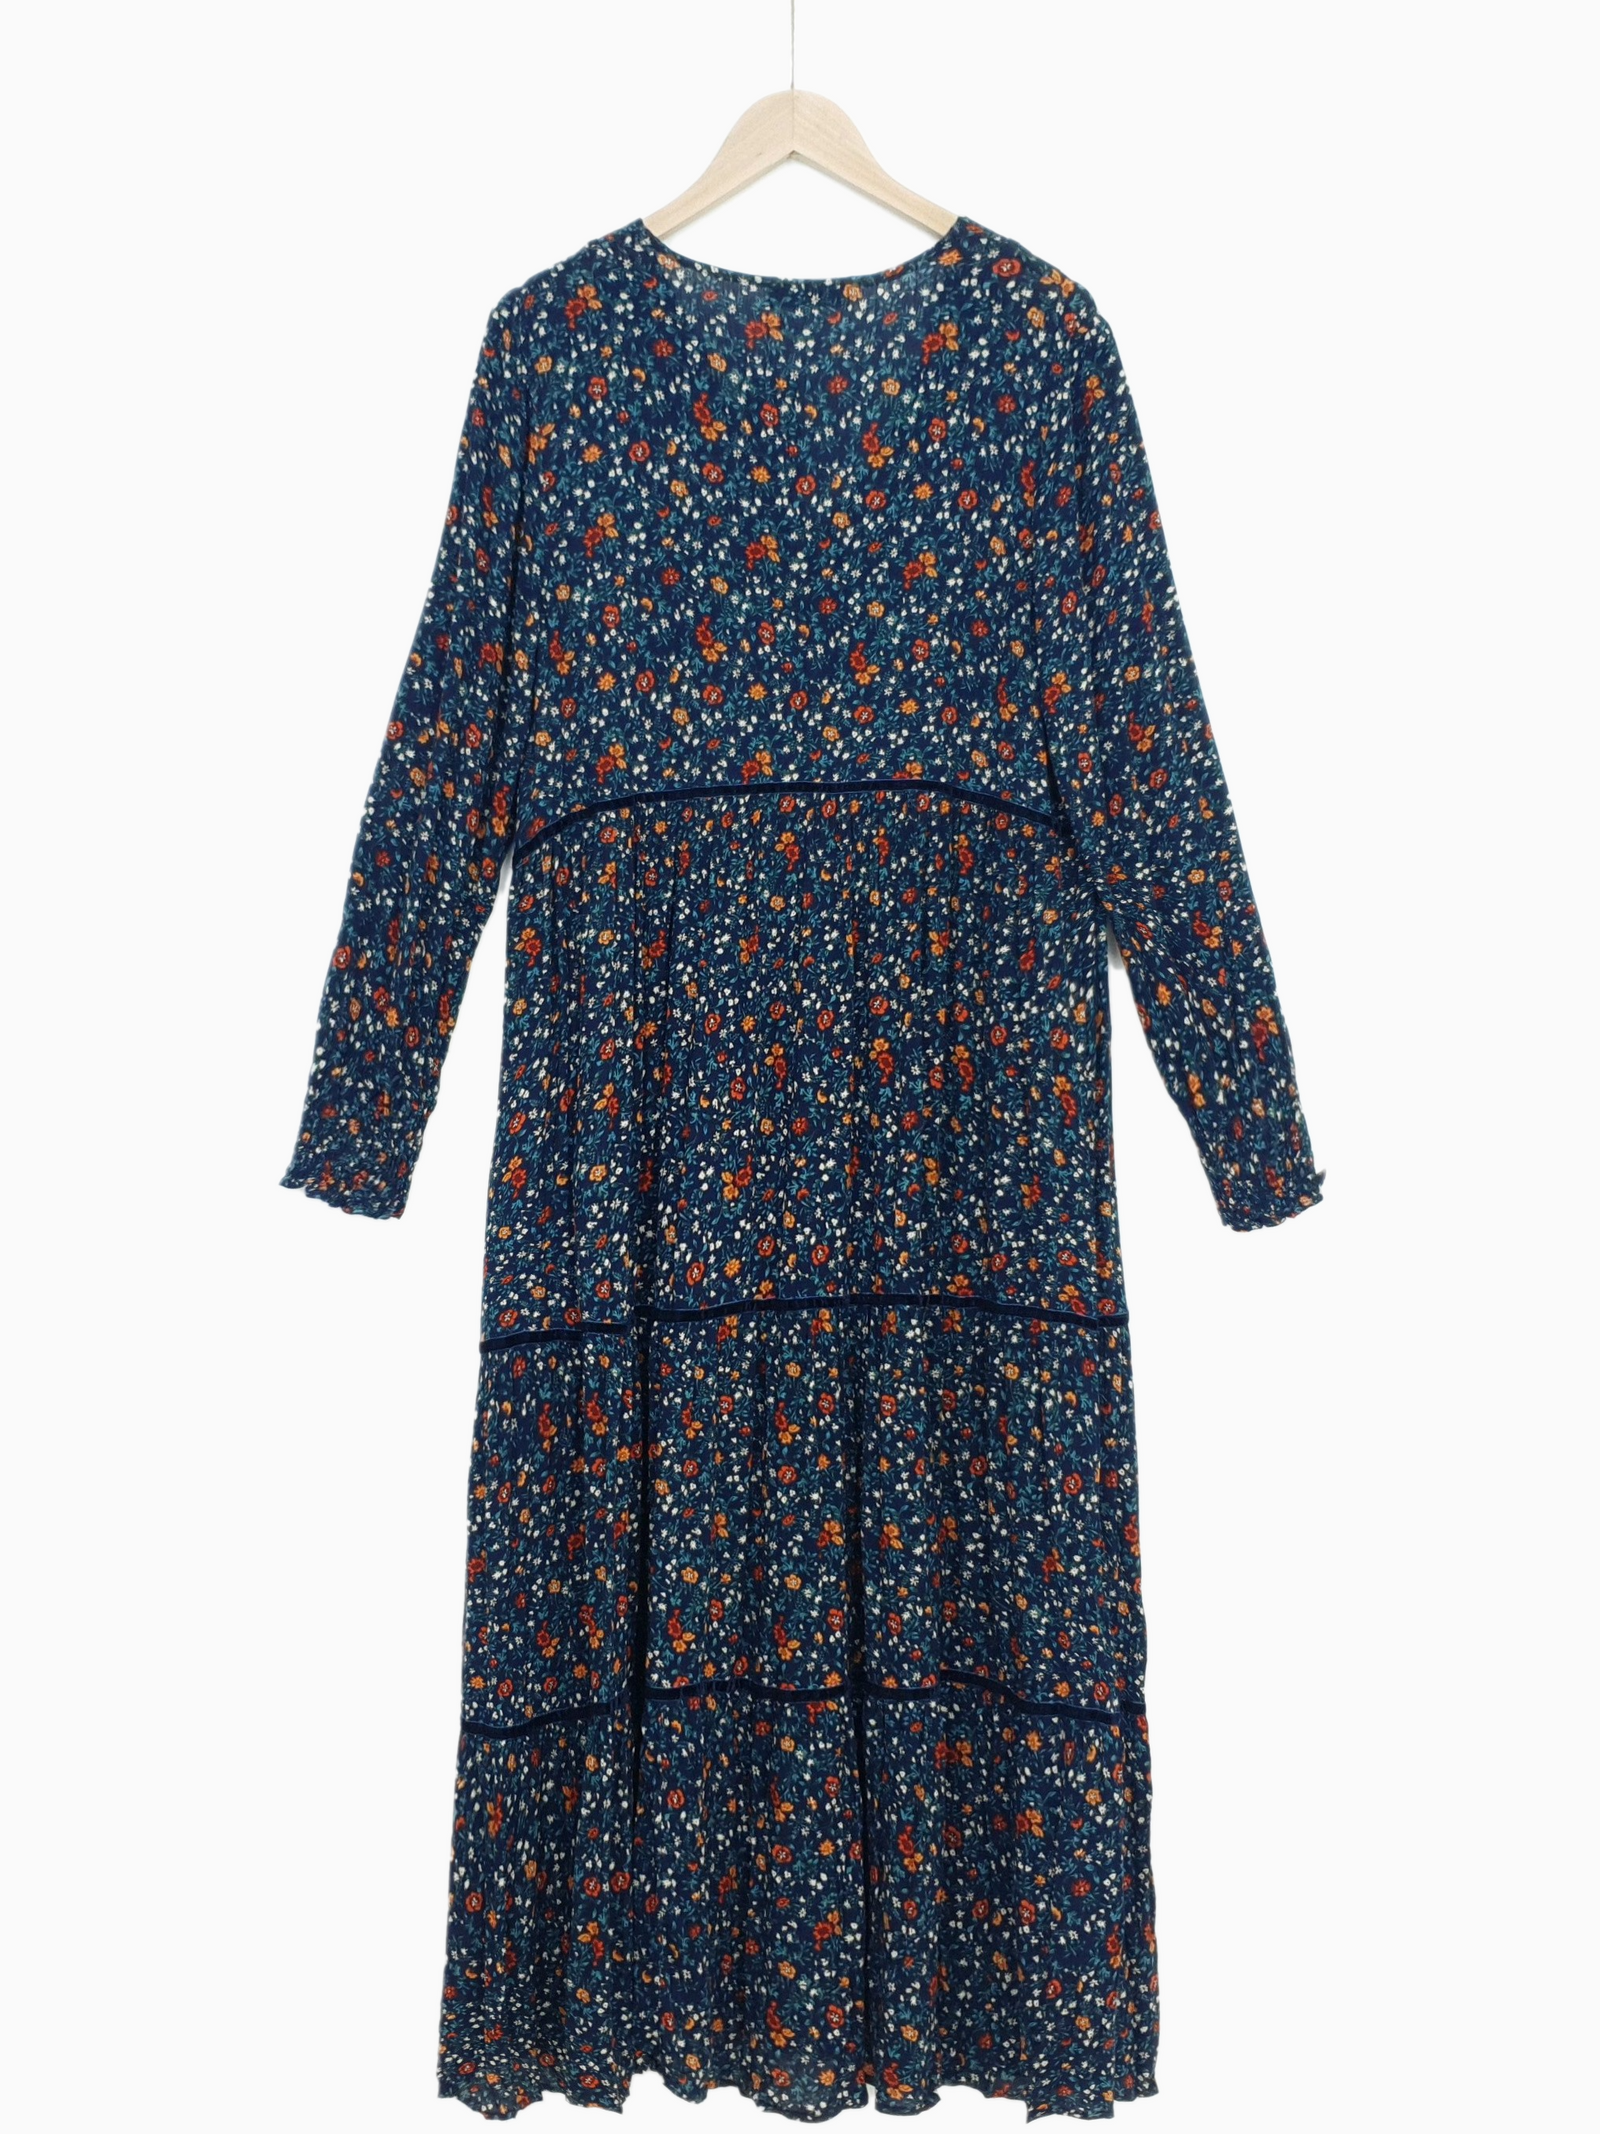 KATO | Patterend Long Dress with Trim | Winter Floral